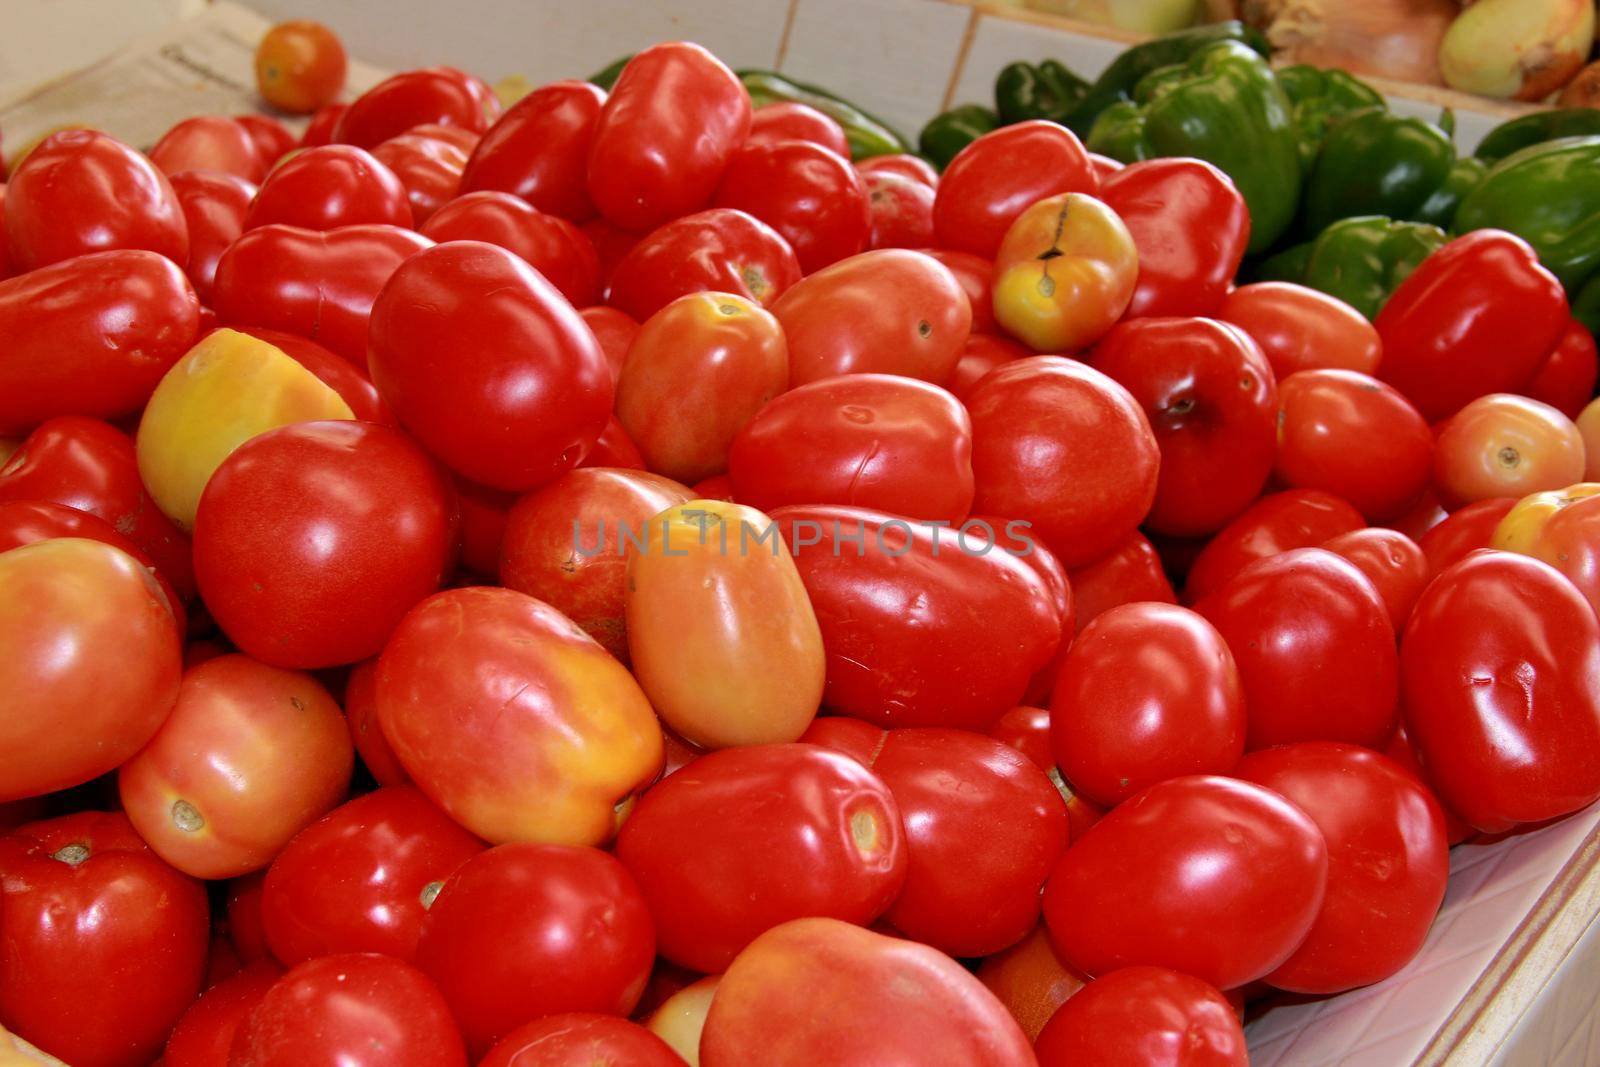 conde, bahia / brazil - september 17, 2012: tomatoes are seen for sale at an open market in the city of Conde.